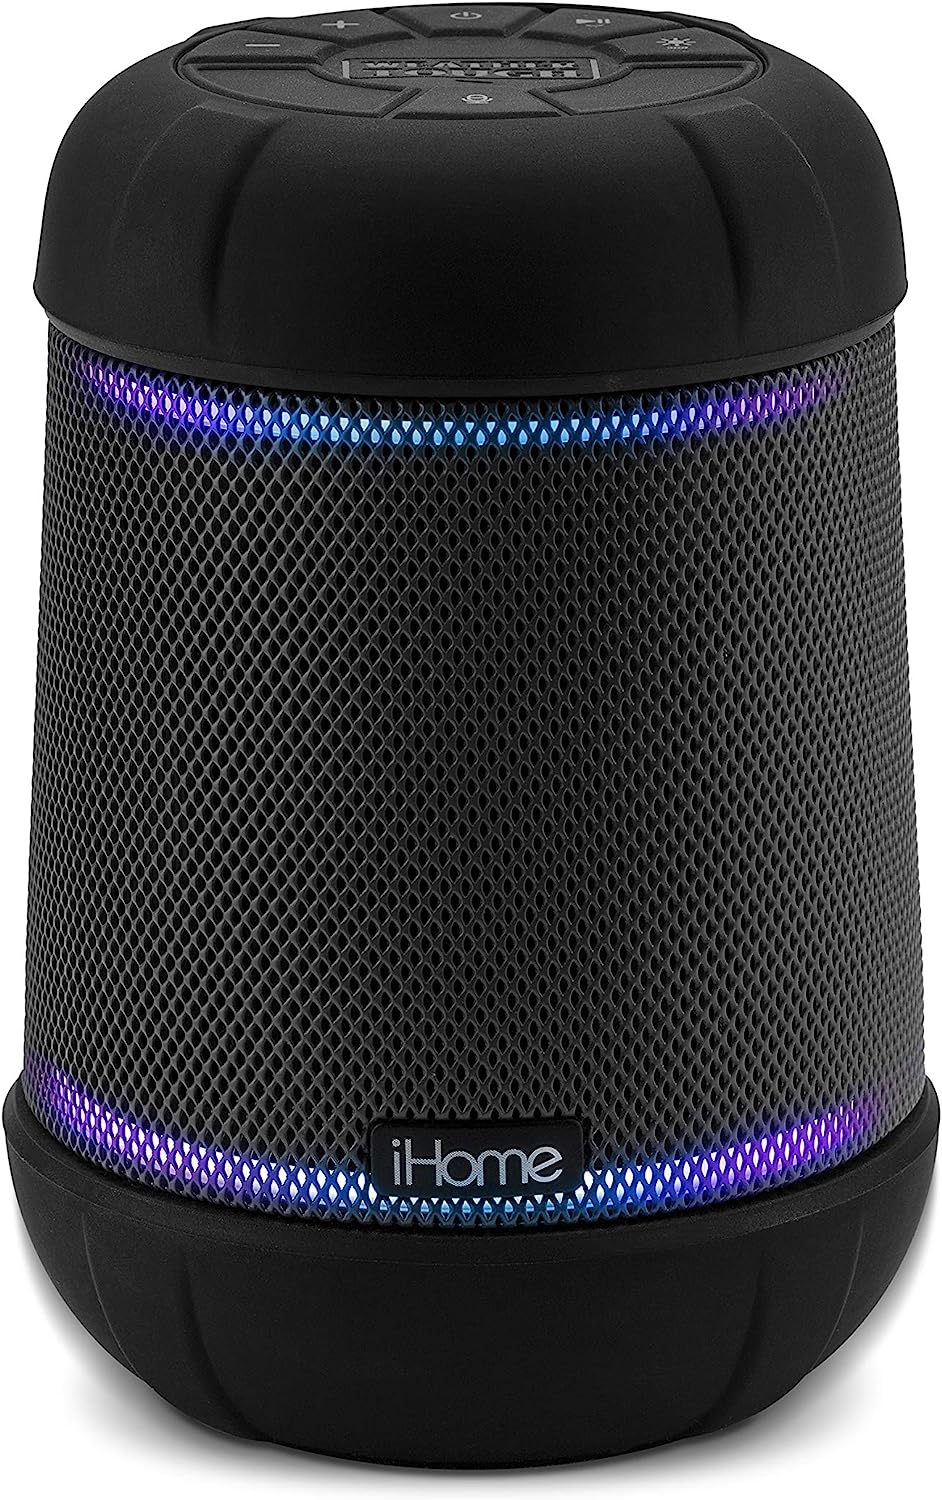 iHome iBT158 Smart Bluetooth Speaker – With Alexa Built-In and Color Changing LED Lights – Perfect Portable Audio Device for Parties, Outdoors, and Other Events